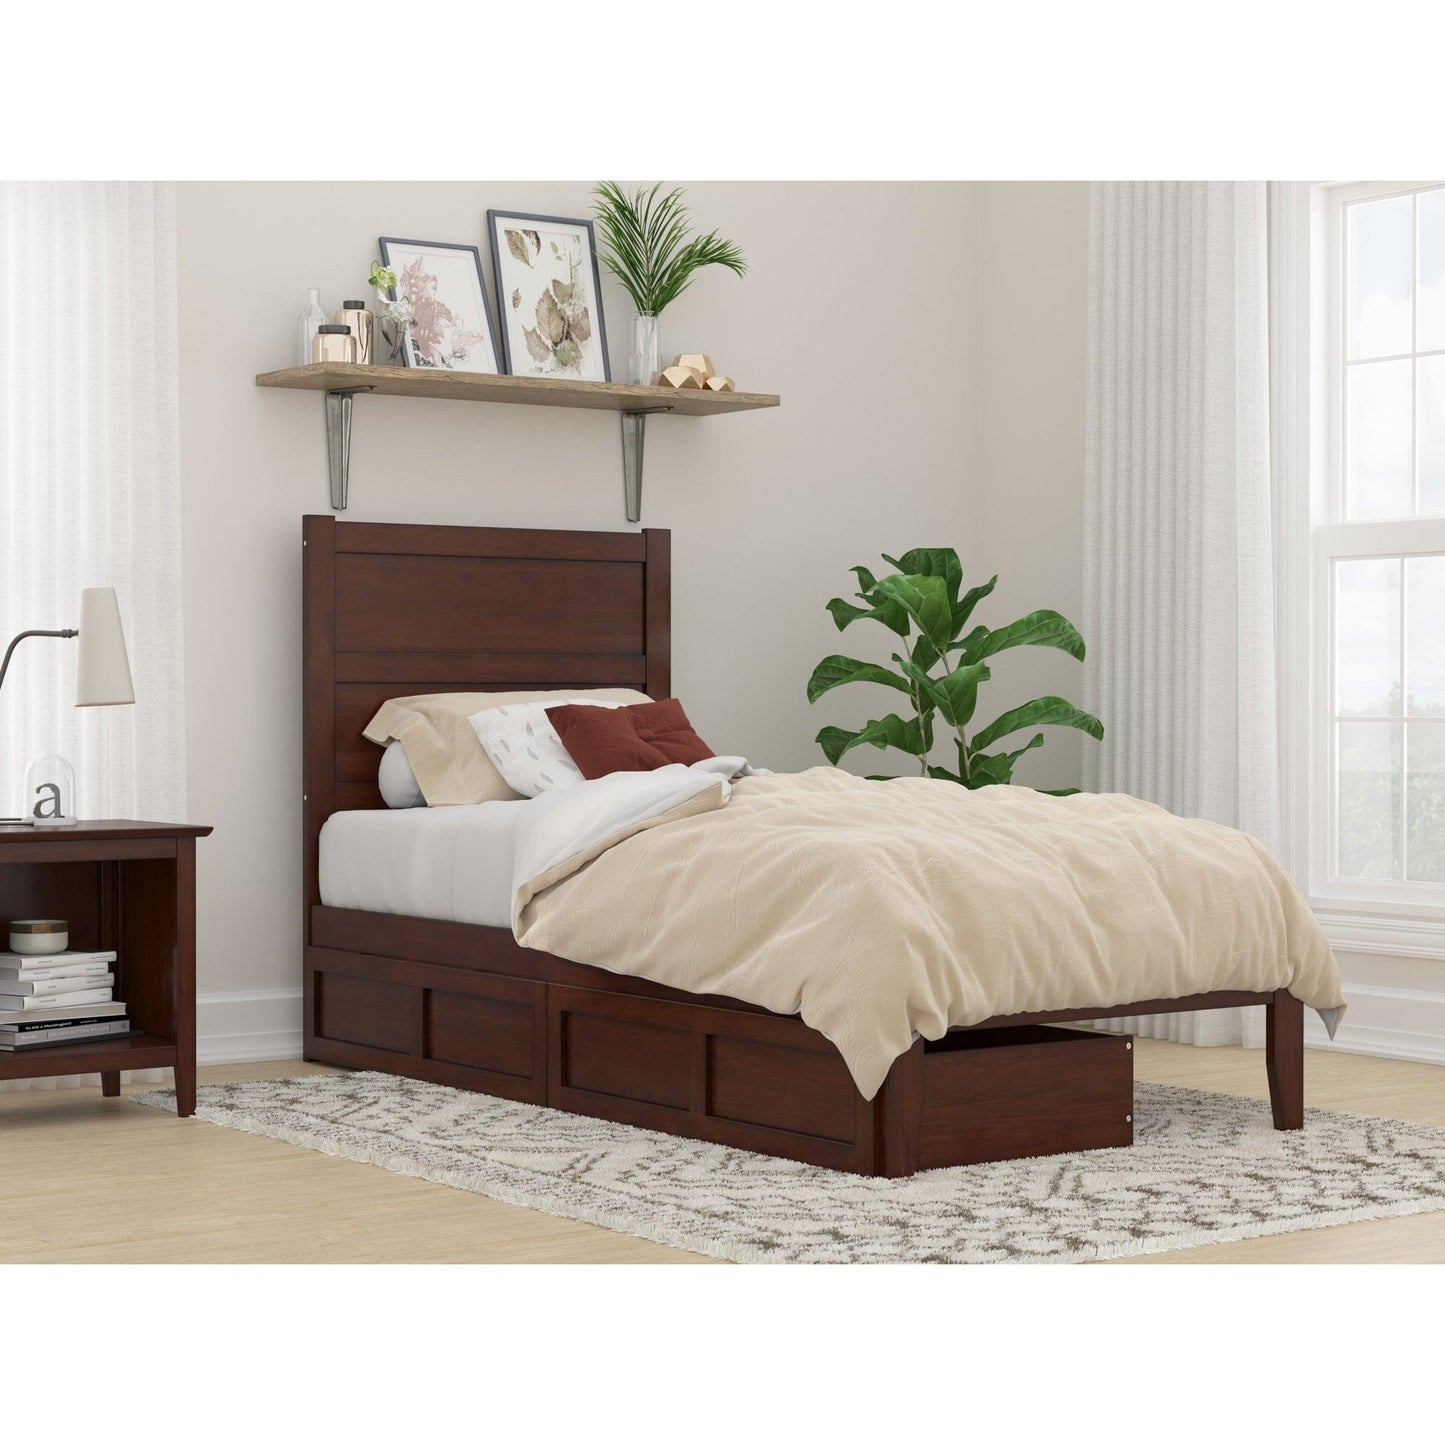 AFI Furnishings NoHo Twin Extra Long Bed with 2 Drawers in Walnut AG9113414